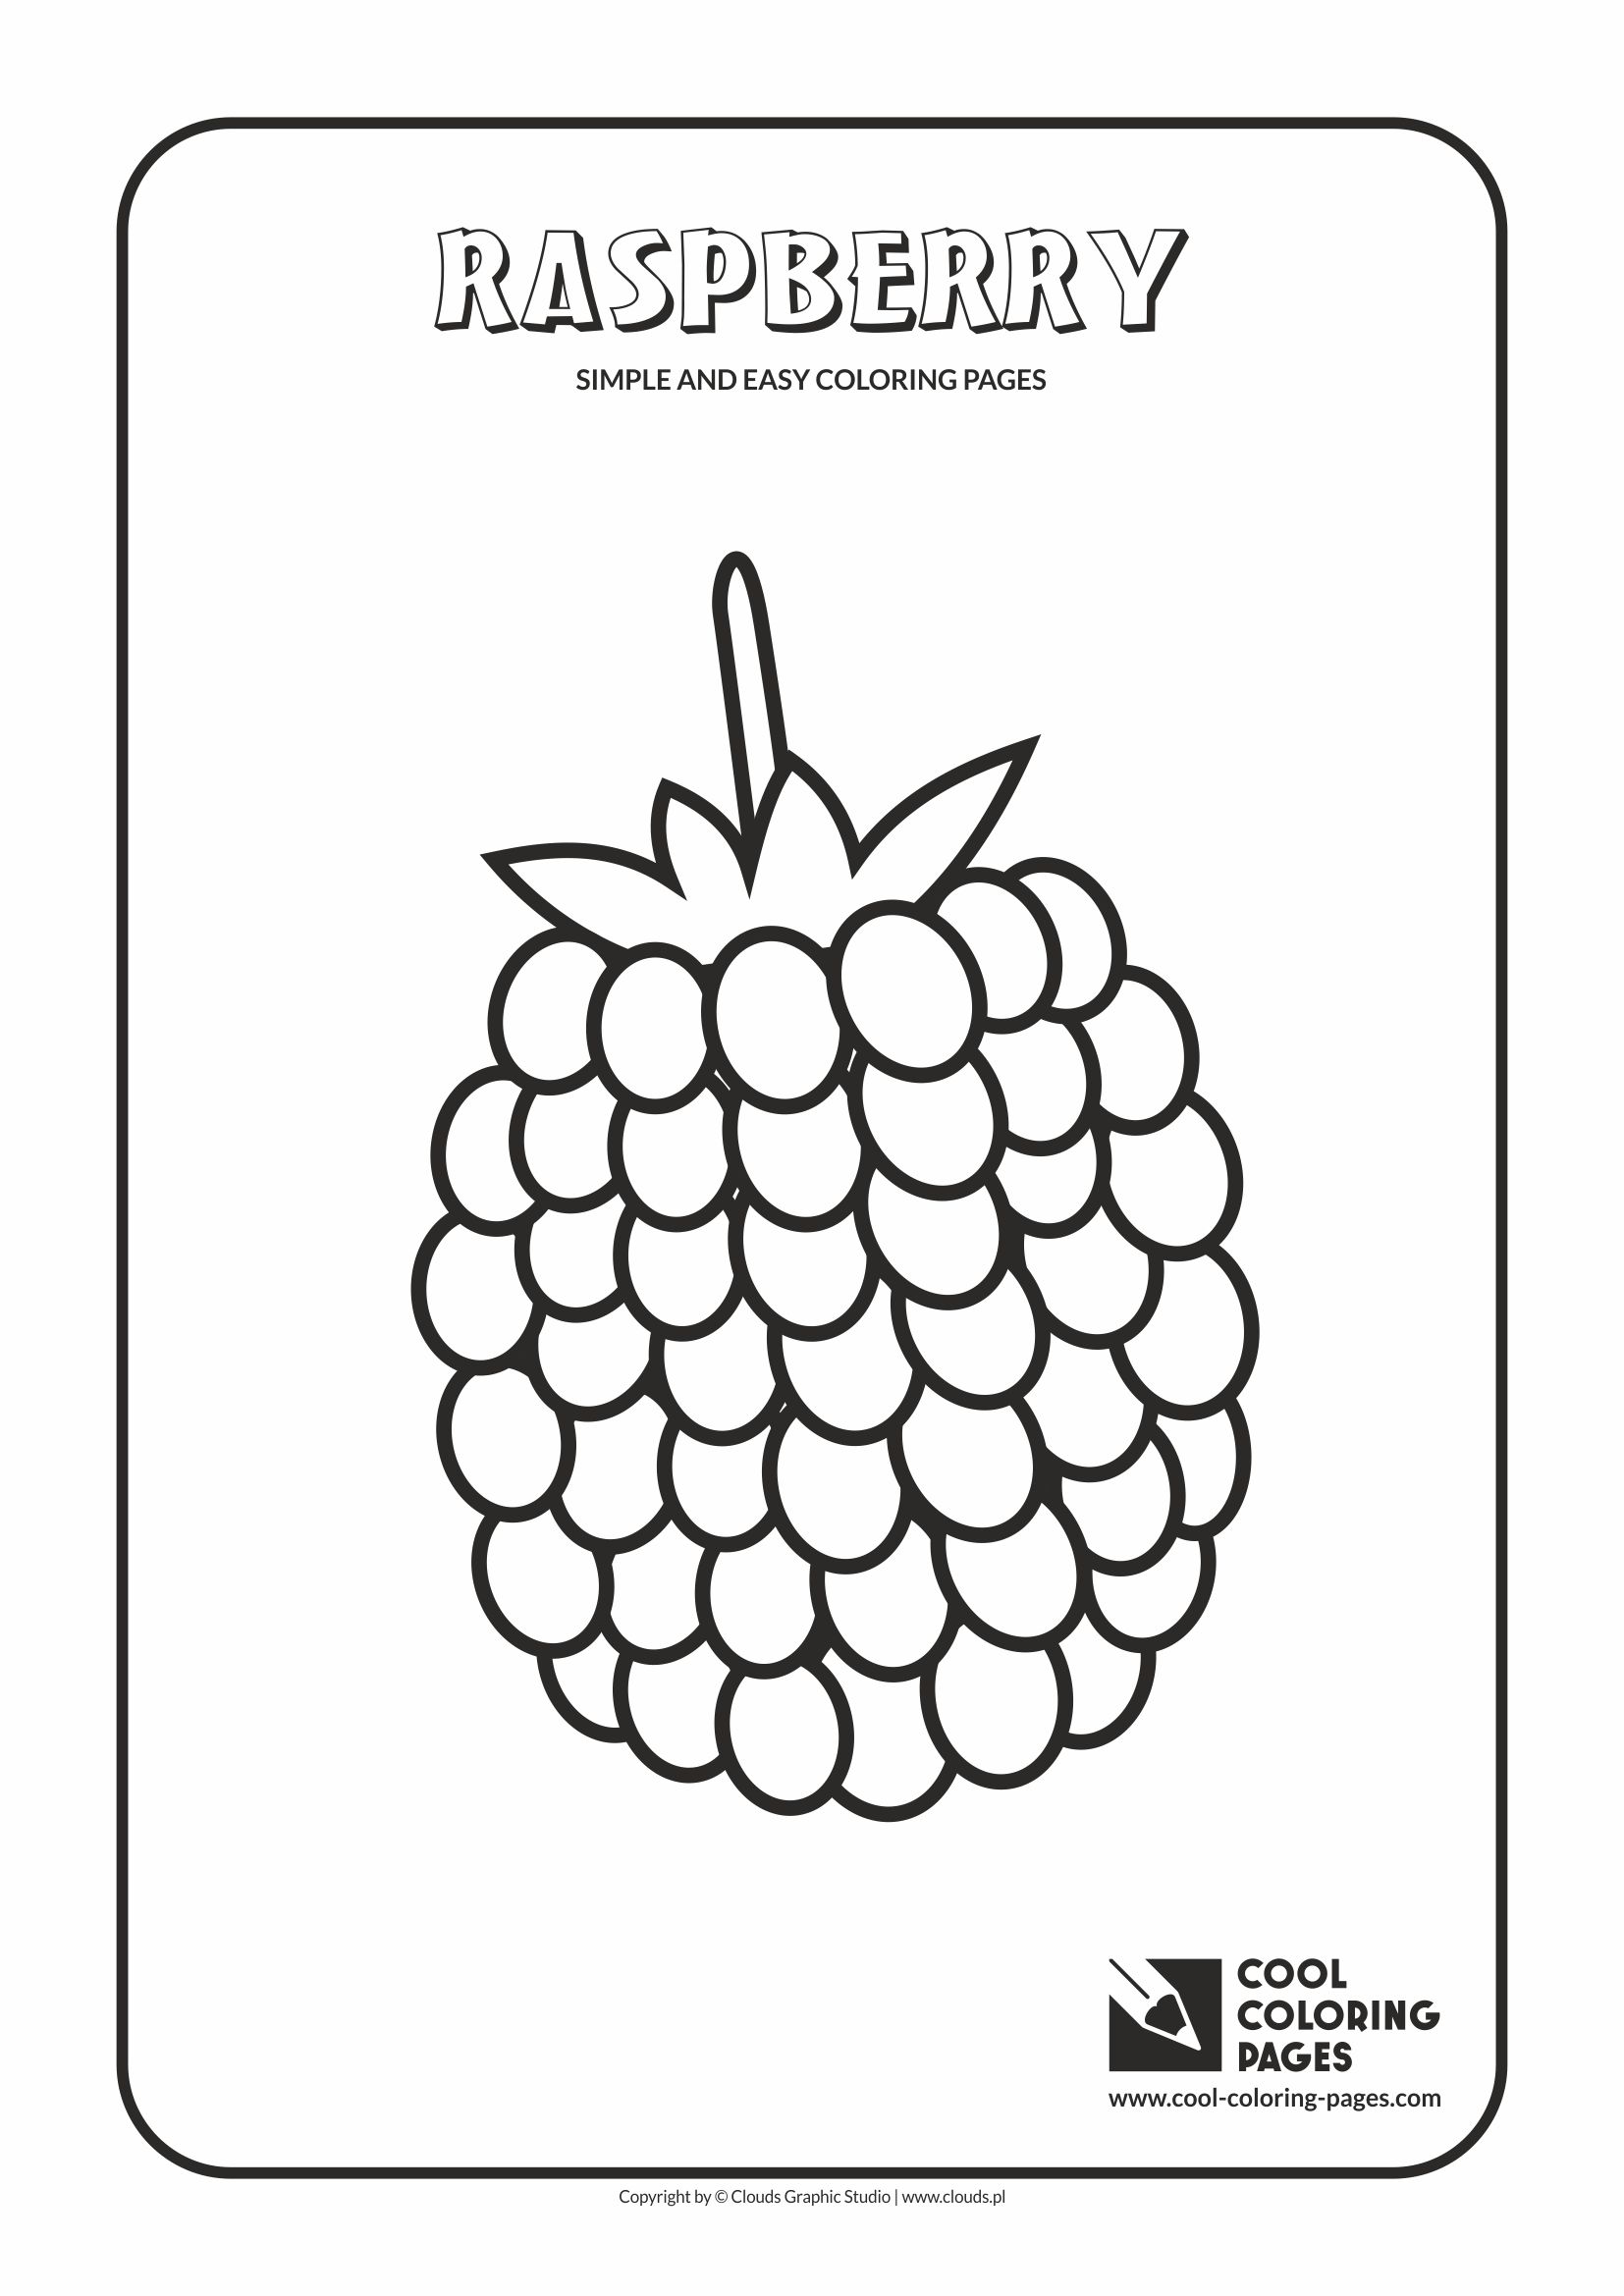 Simple and easy coloring pages for toddlers - Raspberry